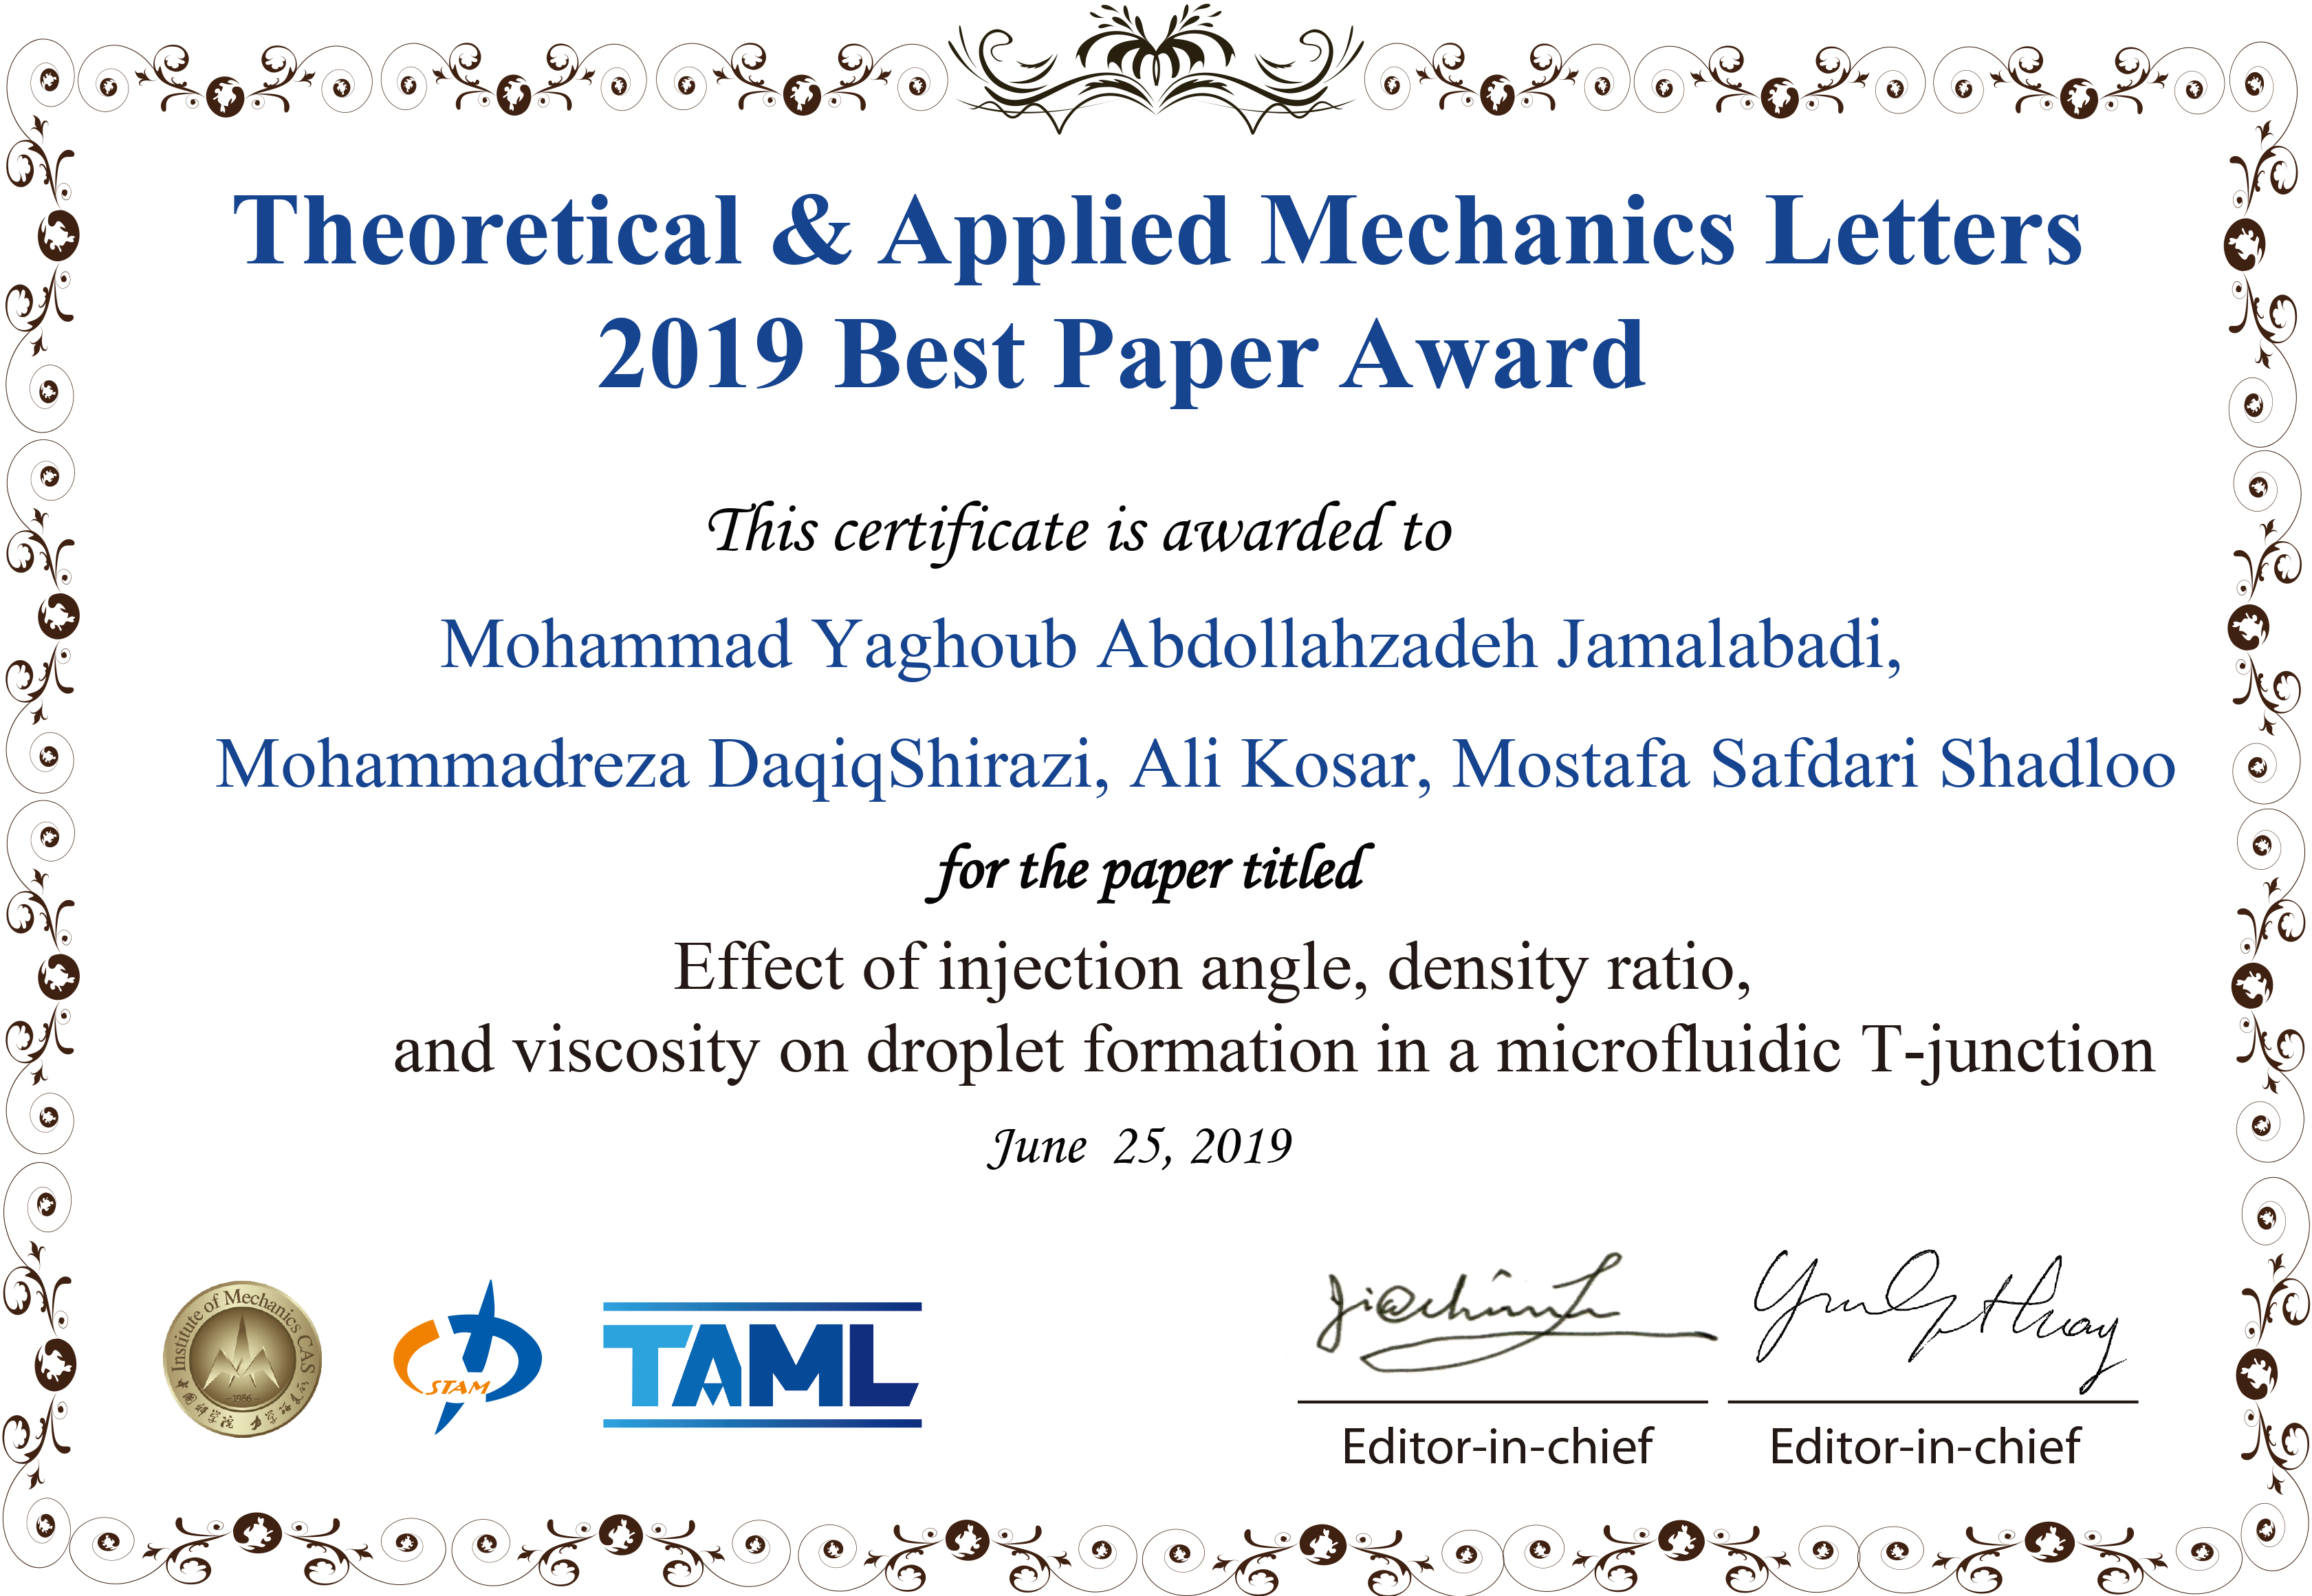 Congratulations to Theoretical and Applied Mechanics Letters 2015 Best Paper Award Winners